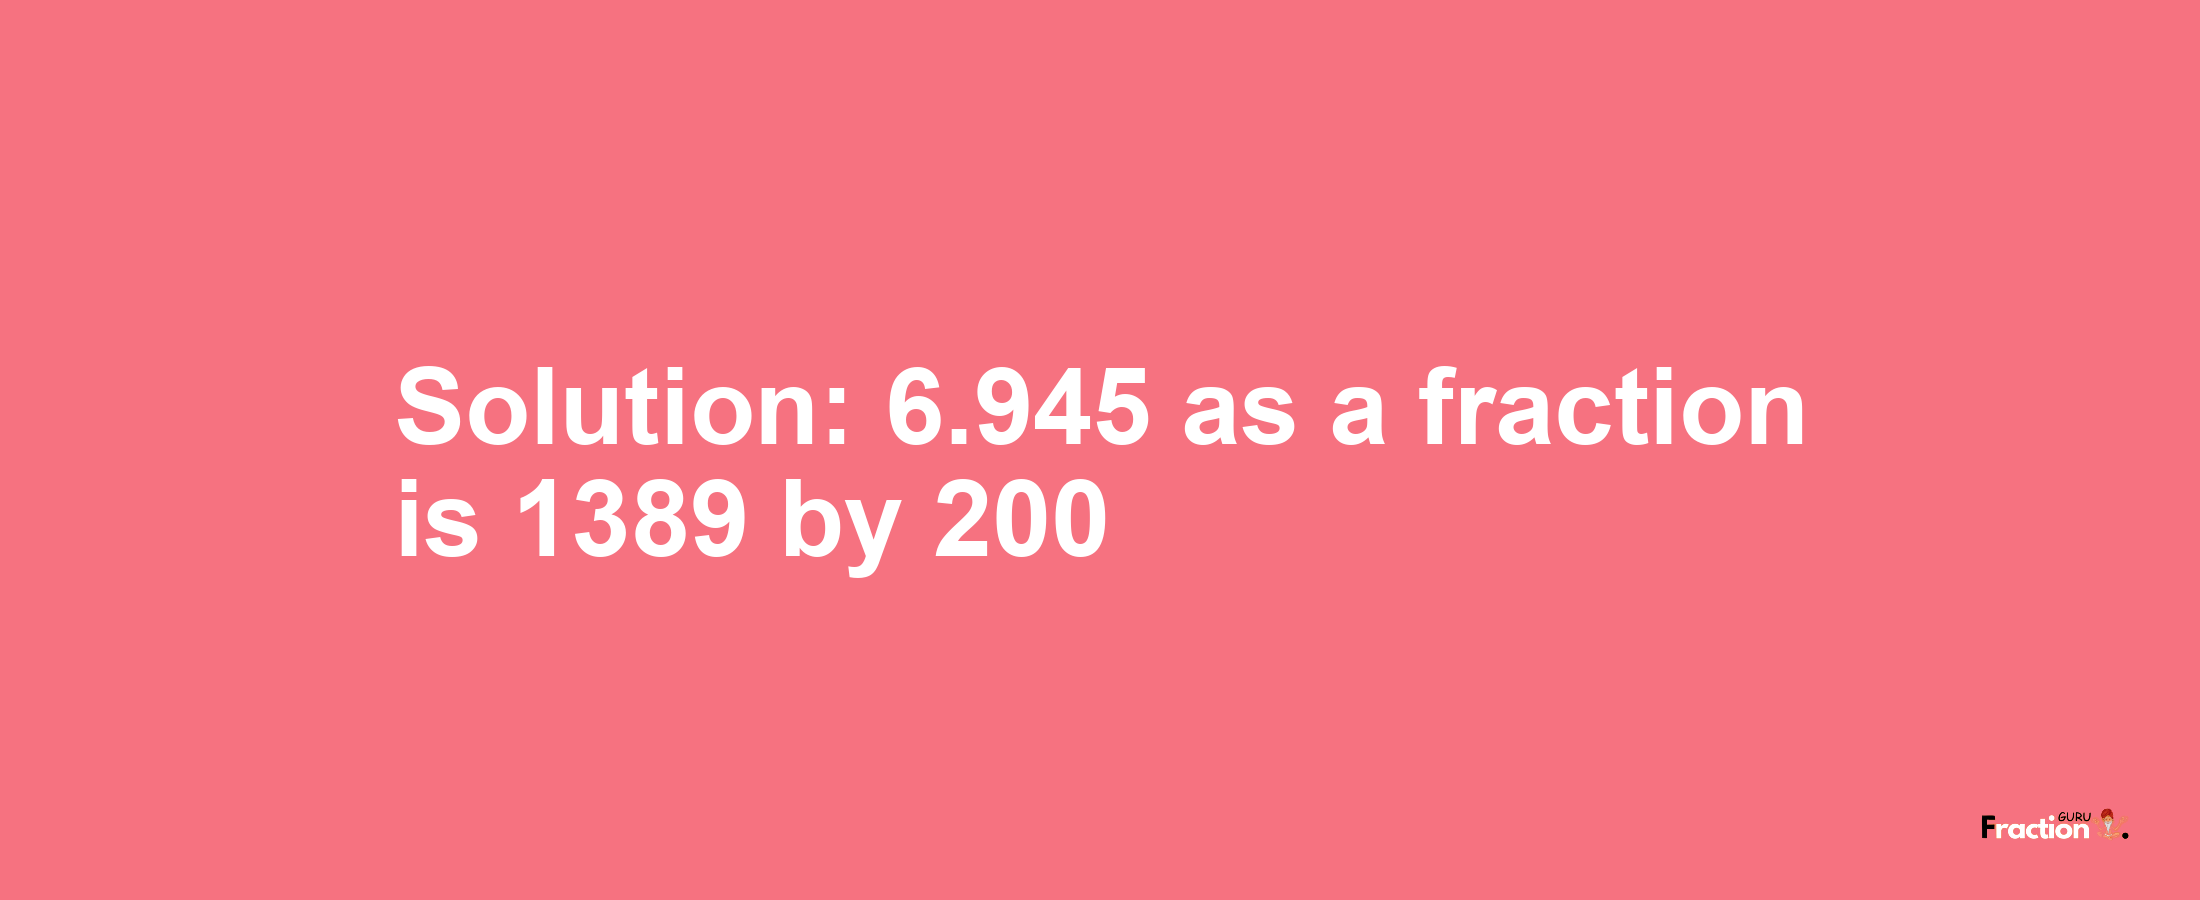 Solution:6.945 as a fraction is 1389/200